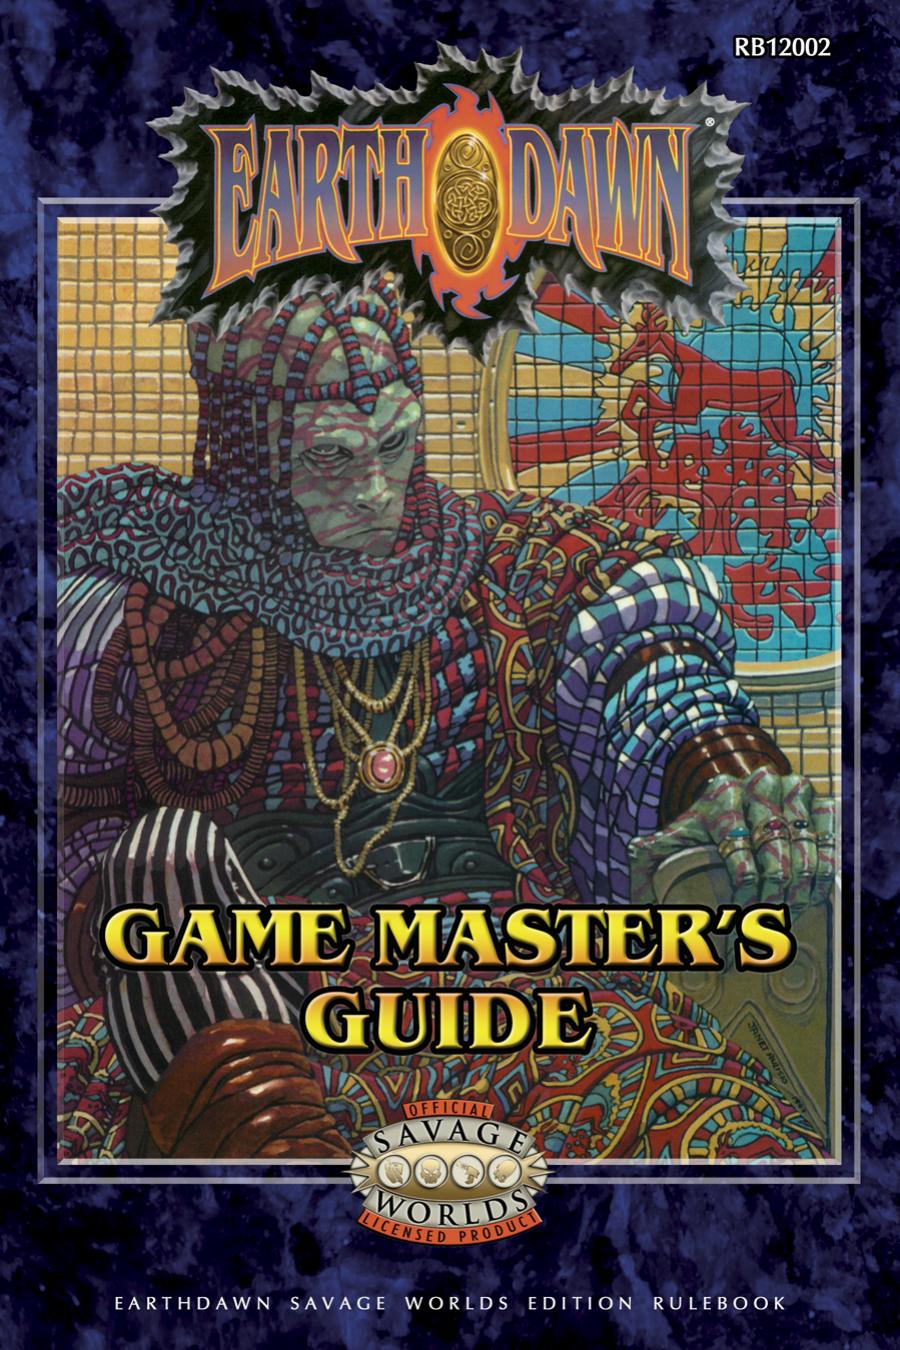 Earthdawn Game Master's Guide